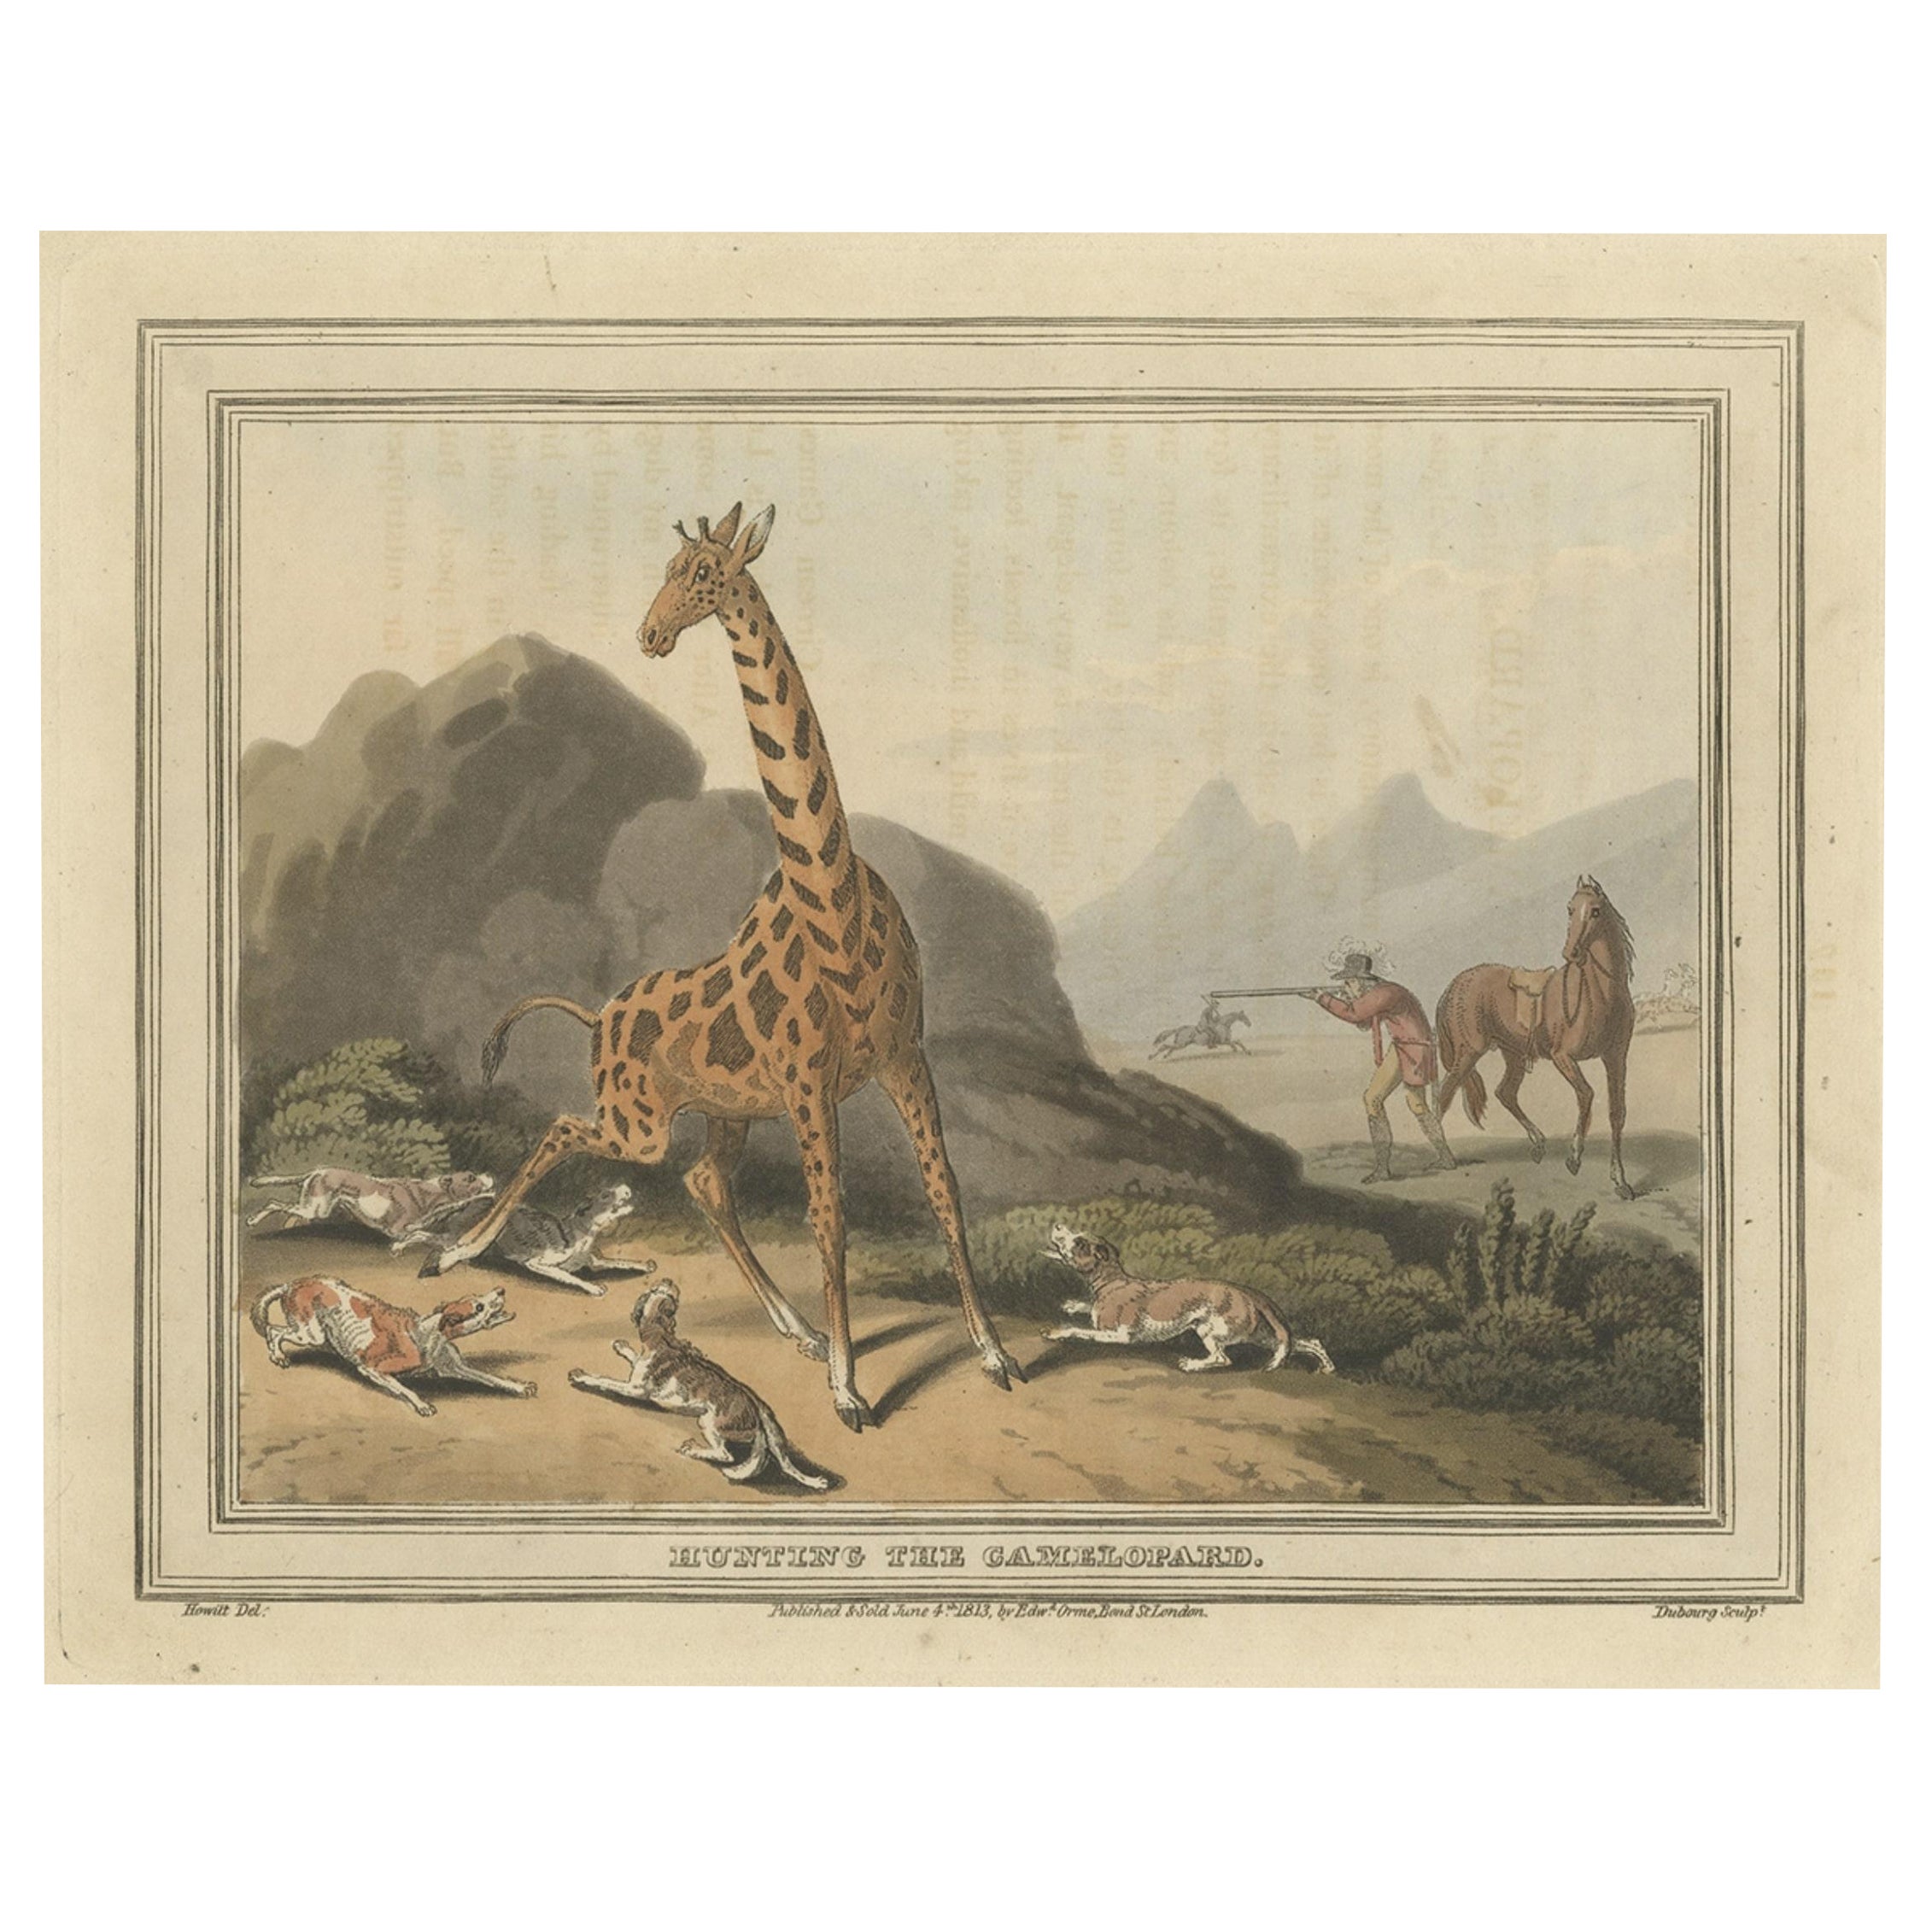 Old Hunting Scene of the 'Camelopard', a Name Often Used for a Giraffe, 1813